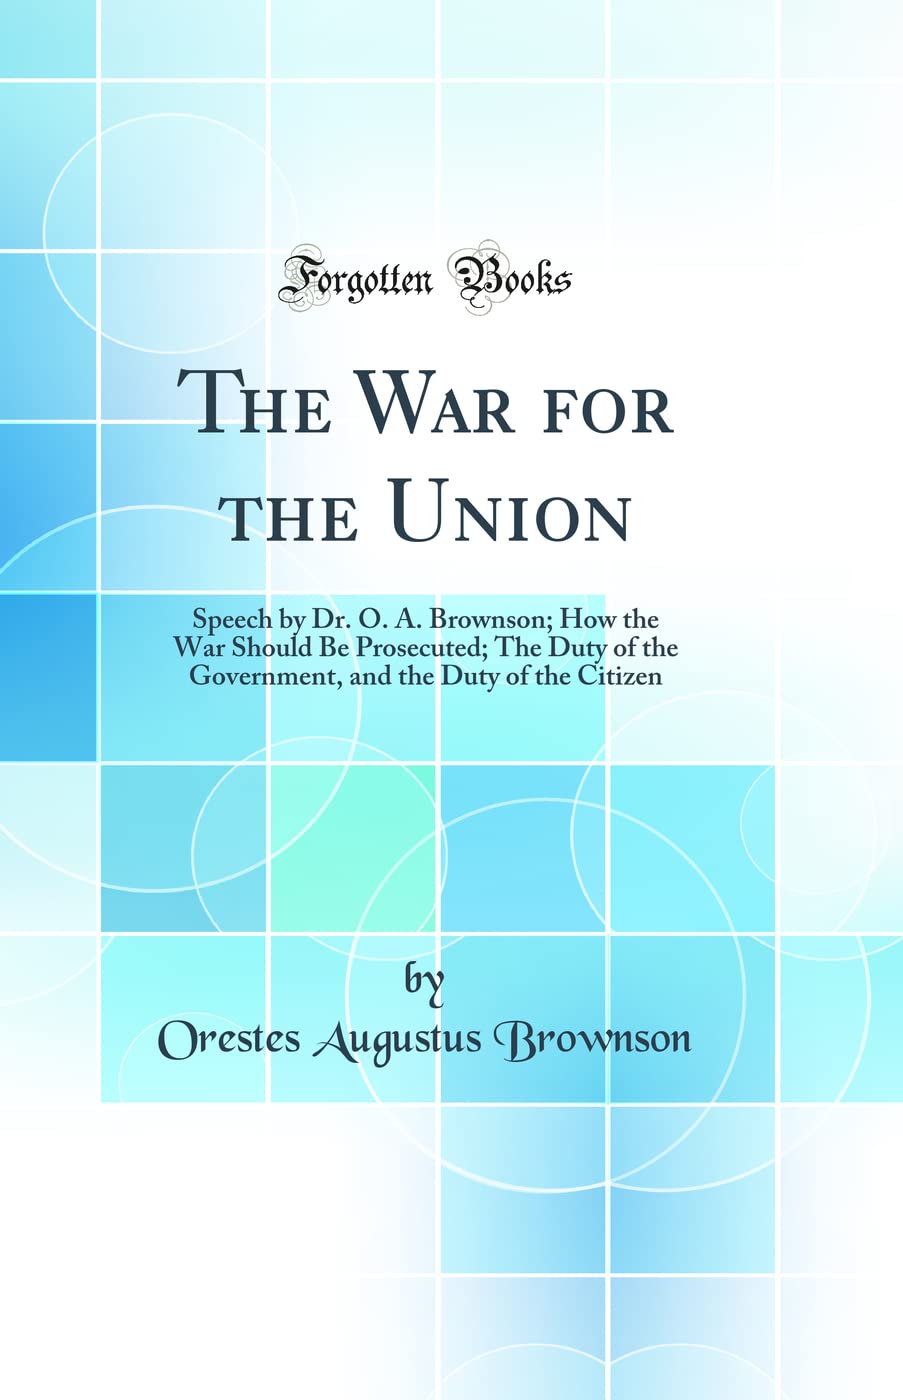 The War for the Union